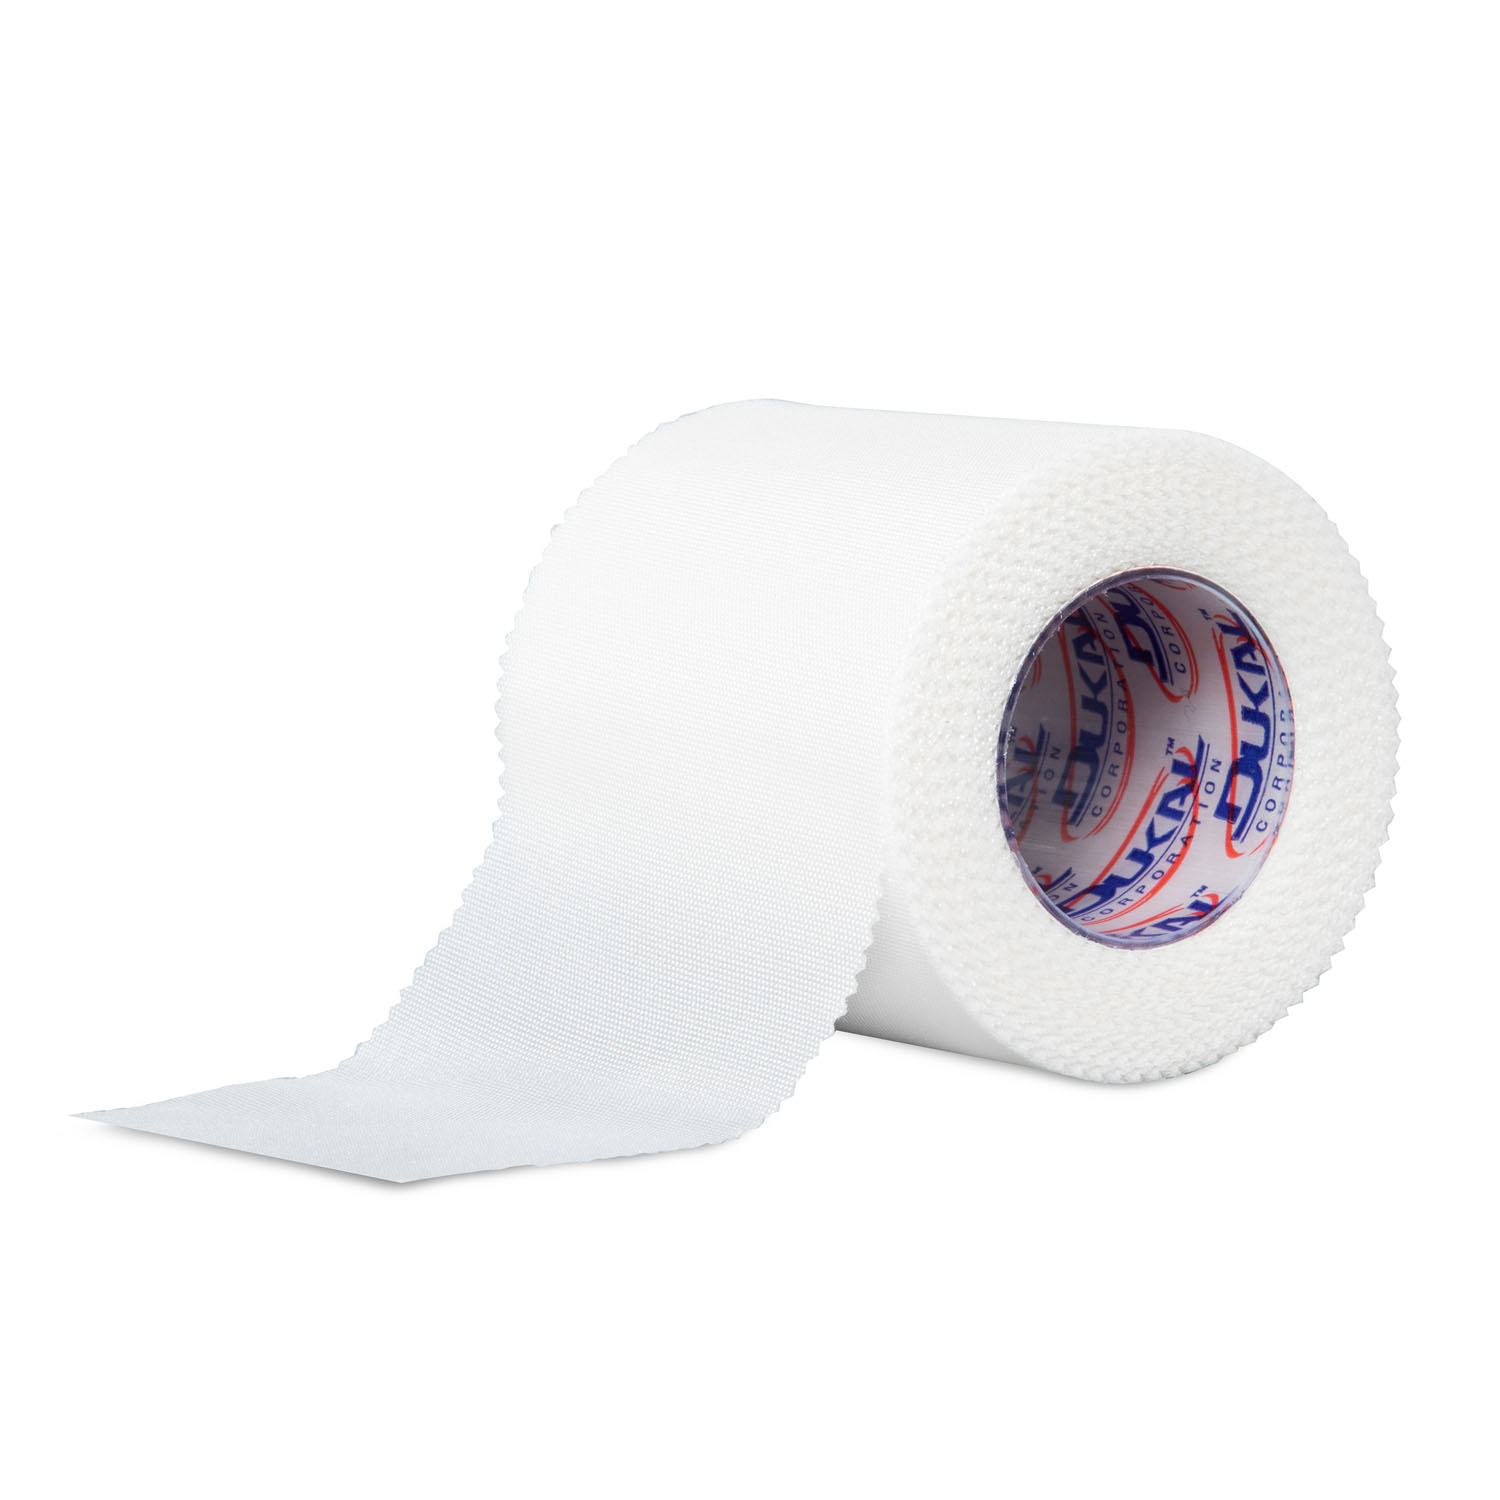 DUKAL SURGICAL TAPE - CLOTH : C210 CS $130.41 Stocked